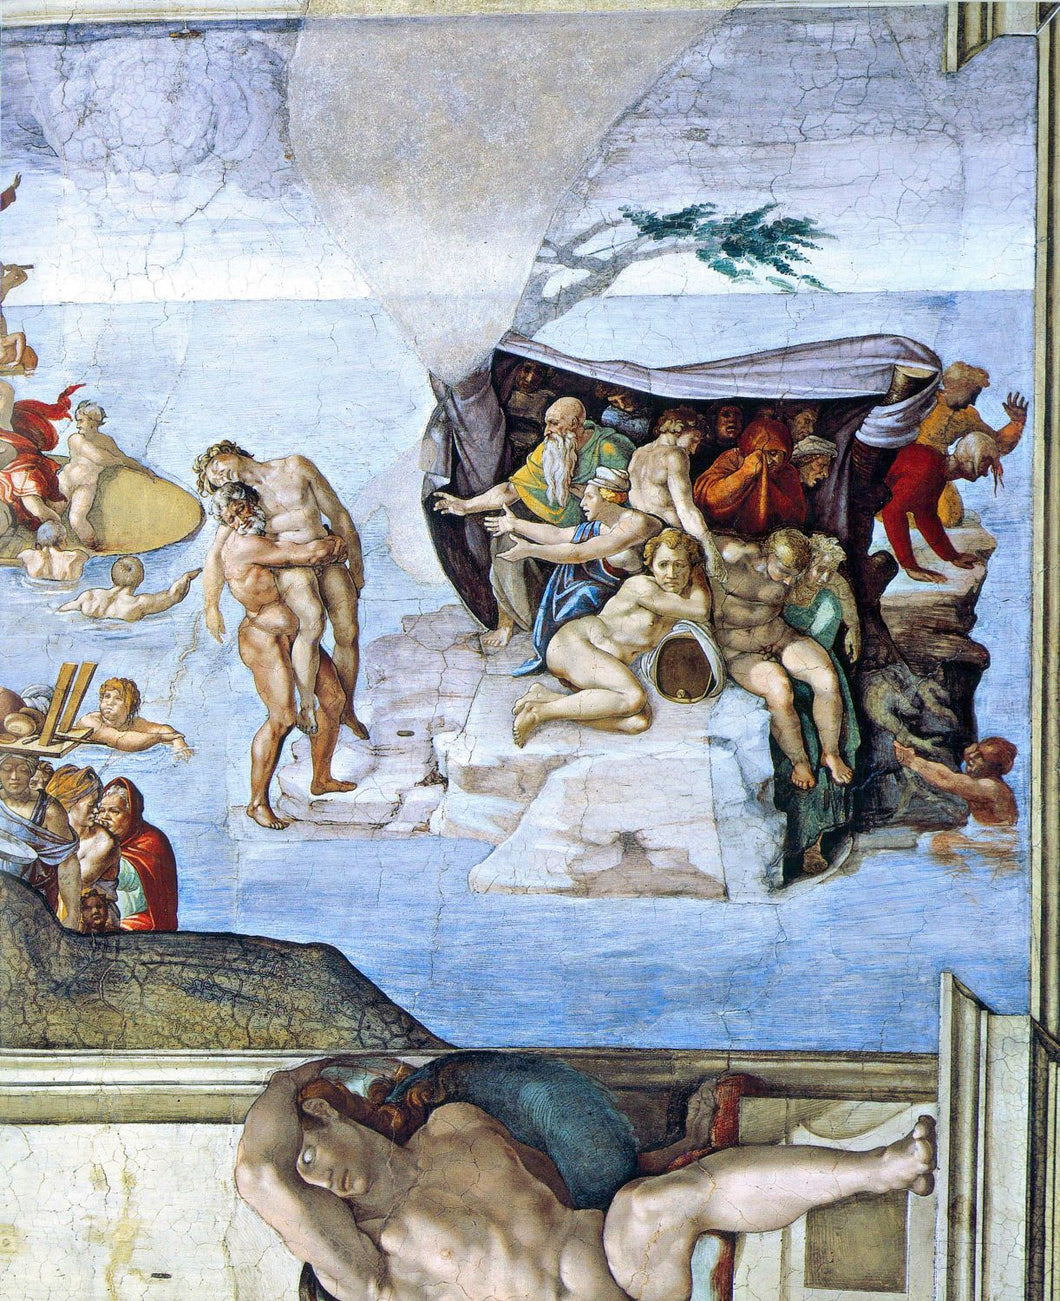 Michelanglo - Creation Story, The Deluge by Michelangelo